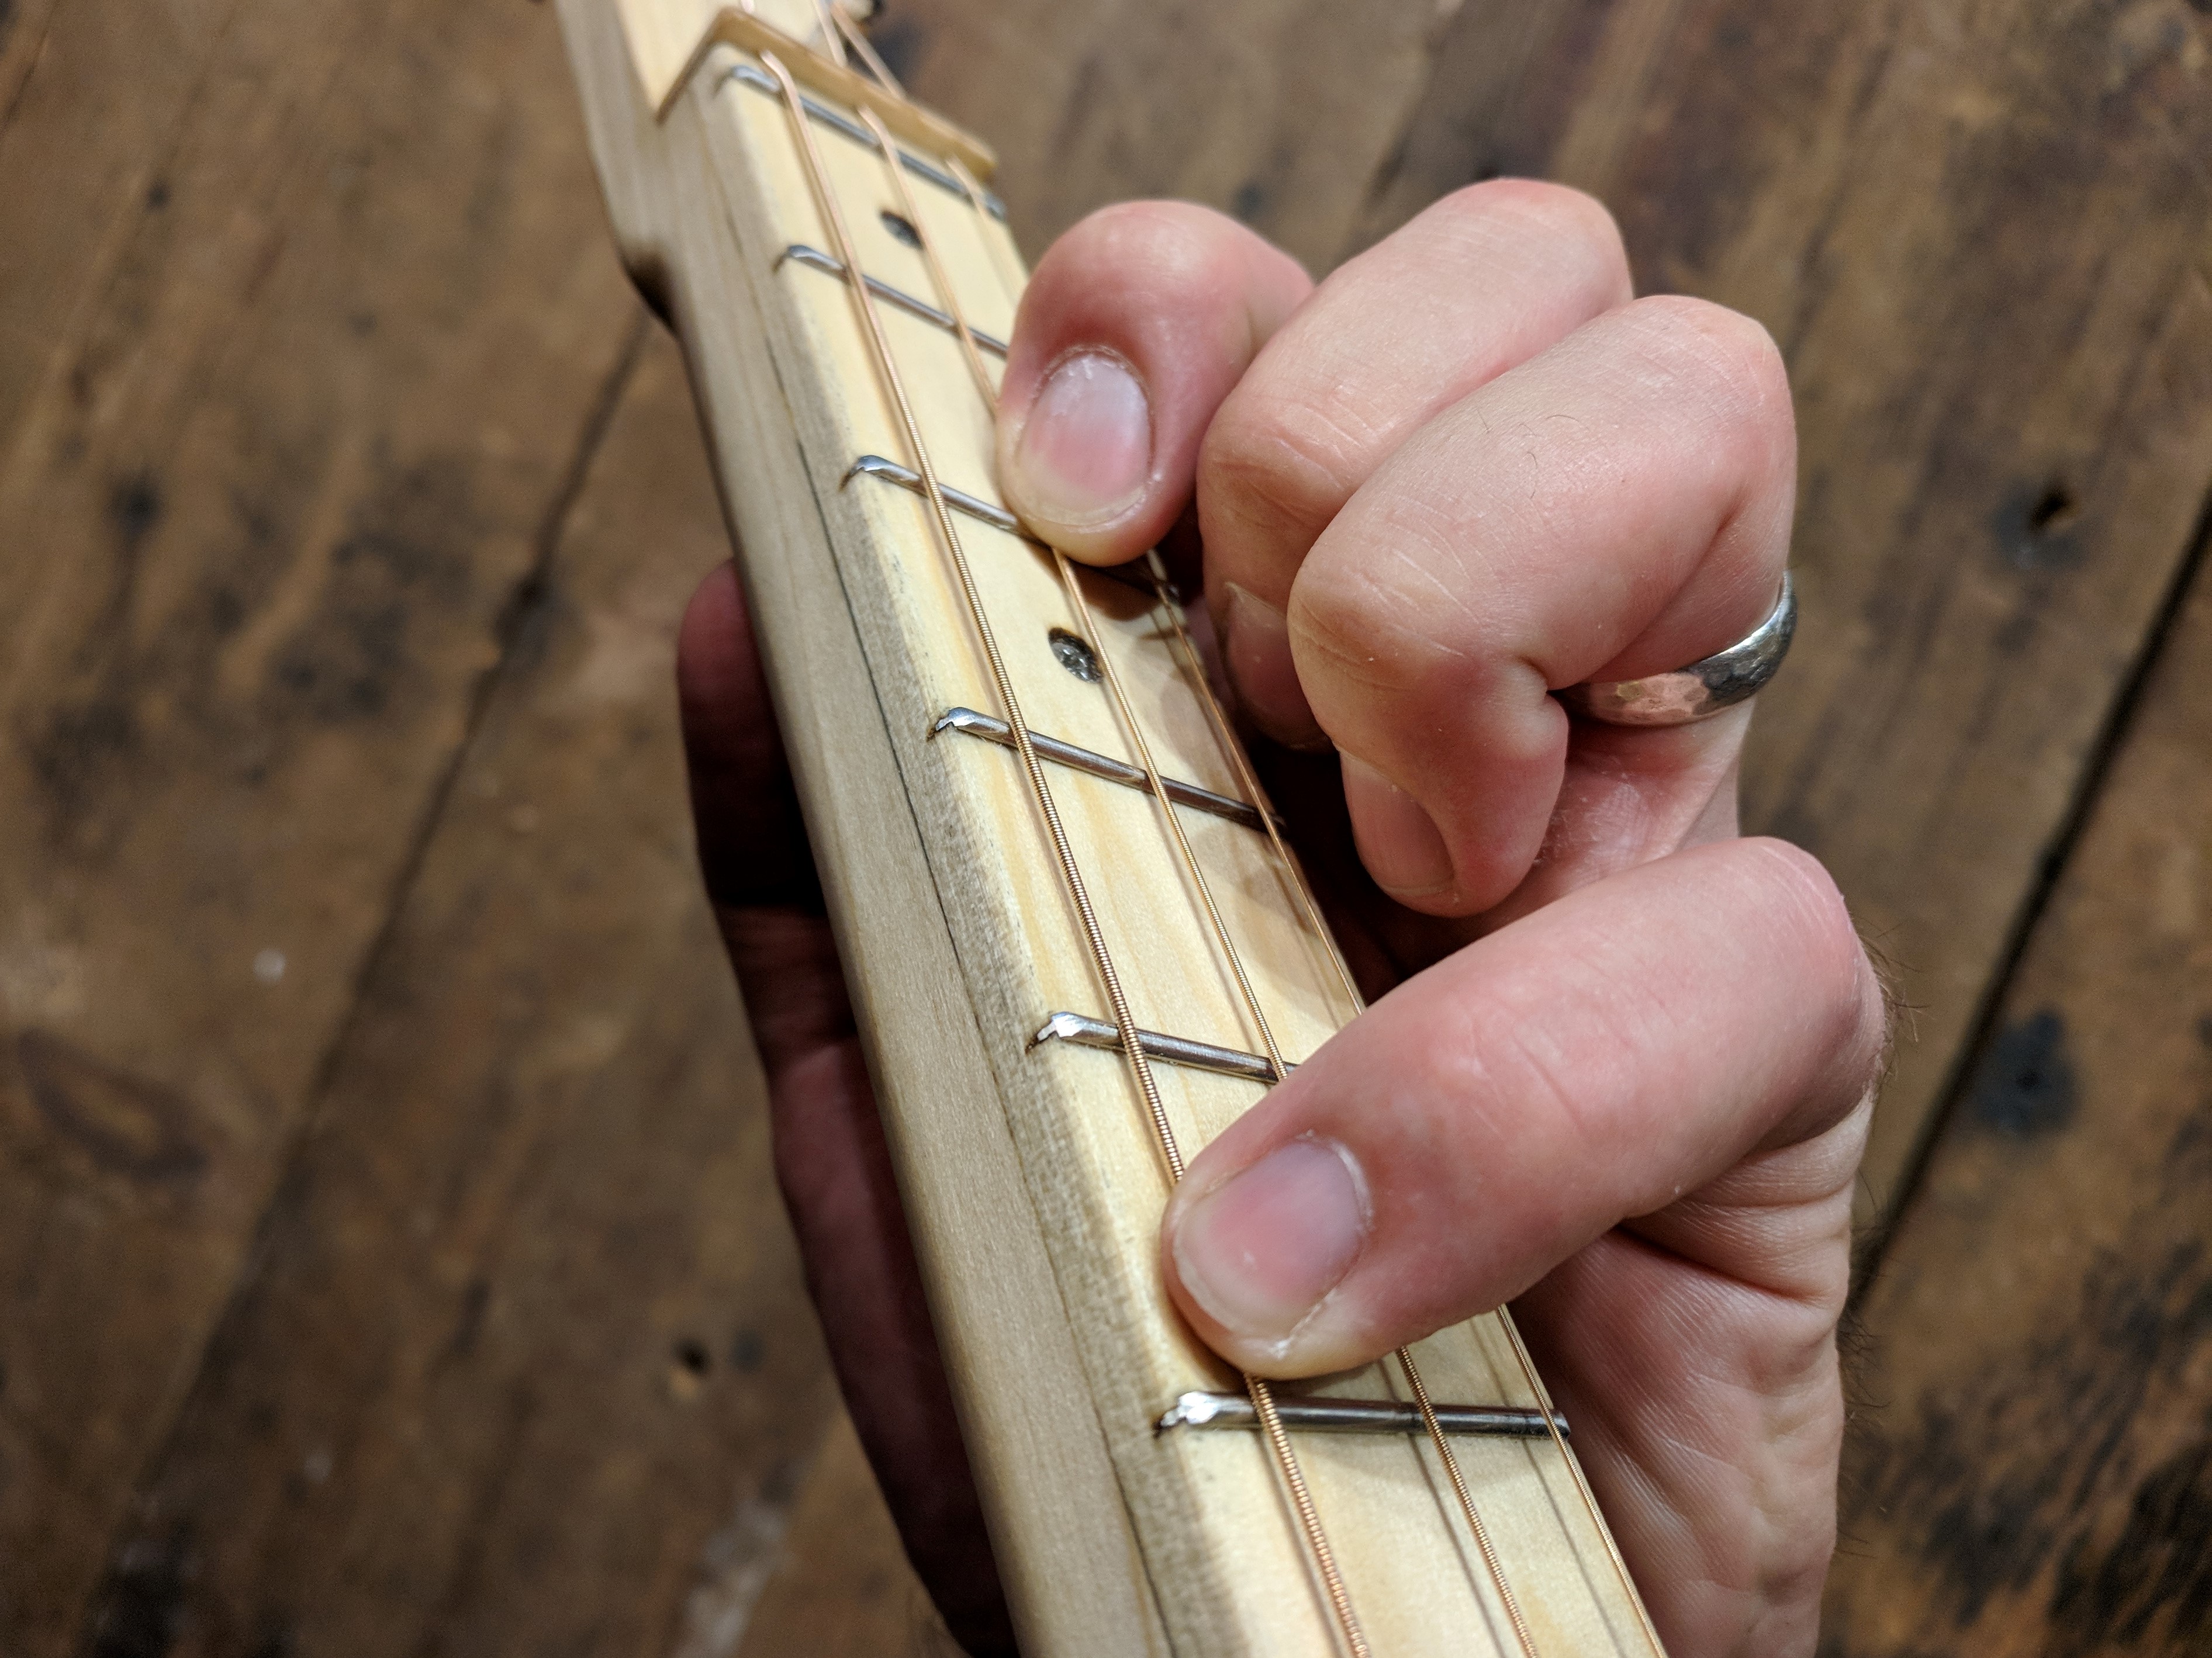 C major chord form for 3-string cigar box guitar, C in the bass